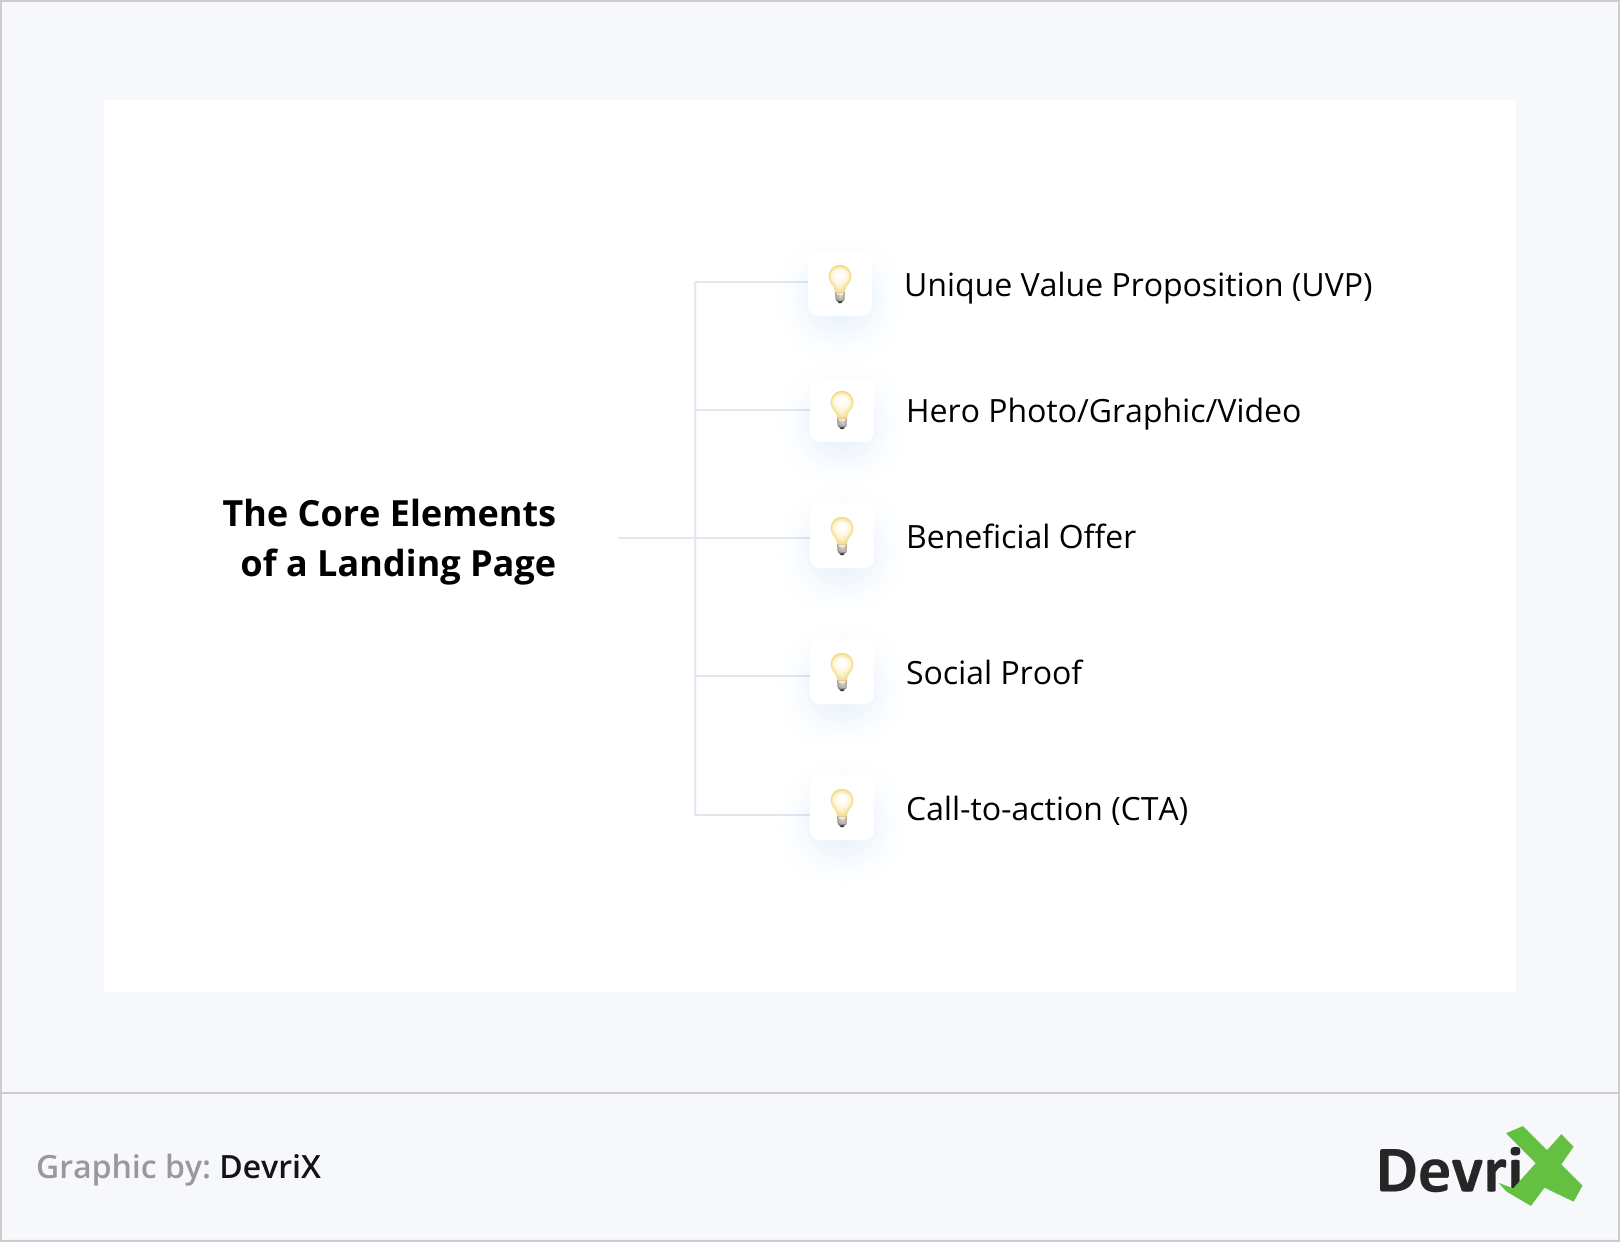 The Core Elements of a Landing Page